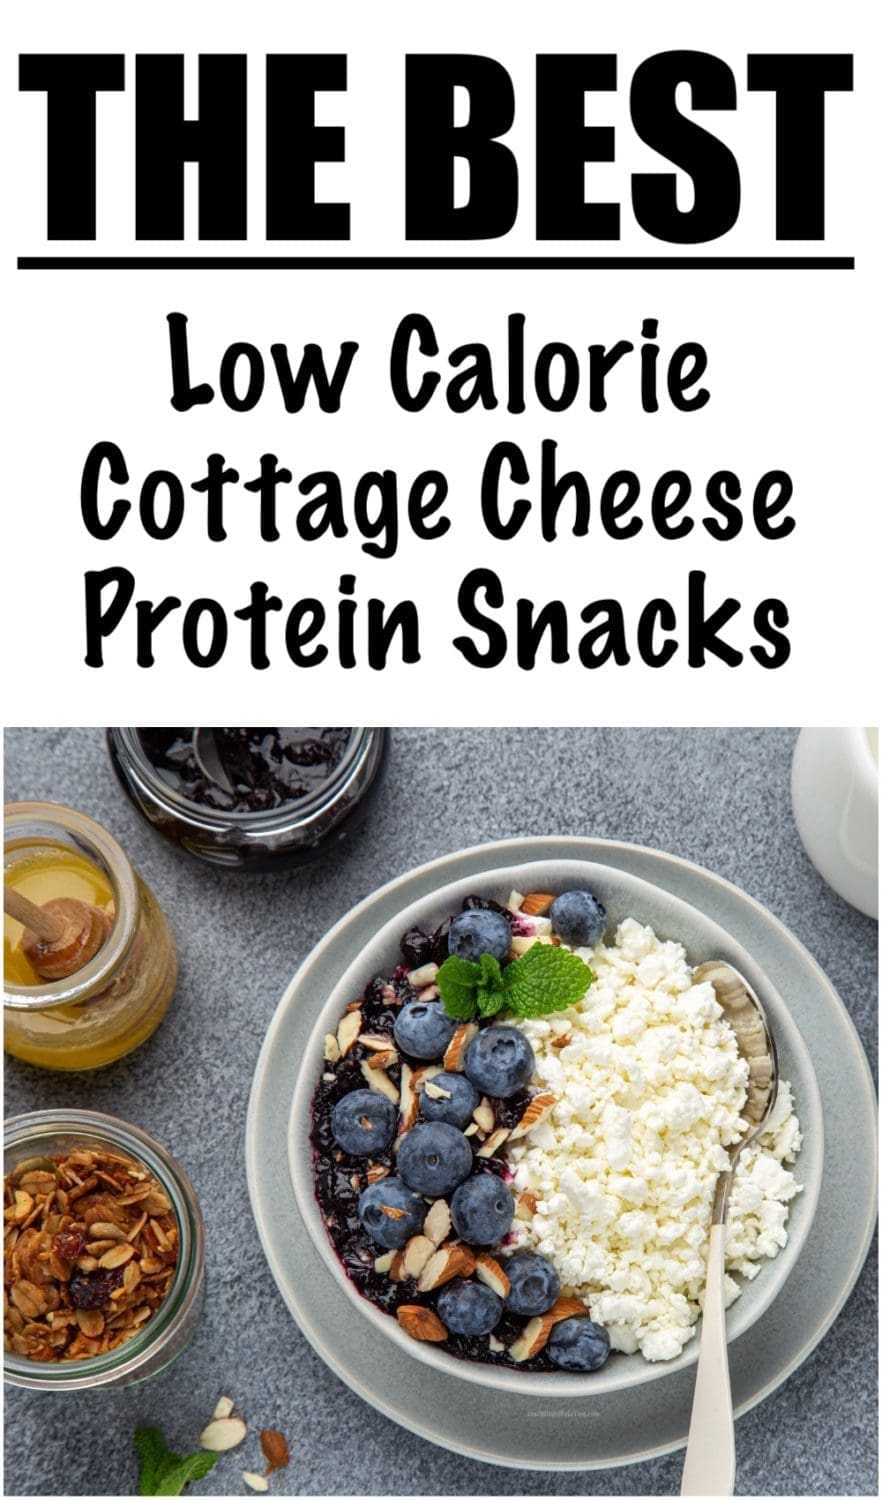 Blueberry Almond Cottage Cheese Protein Snack